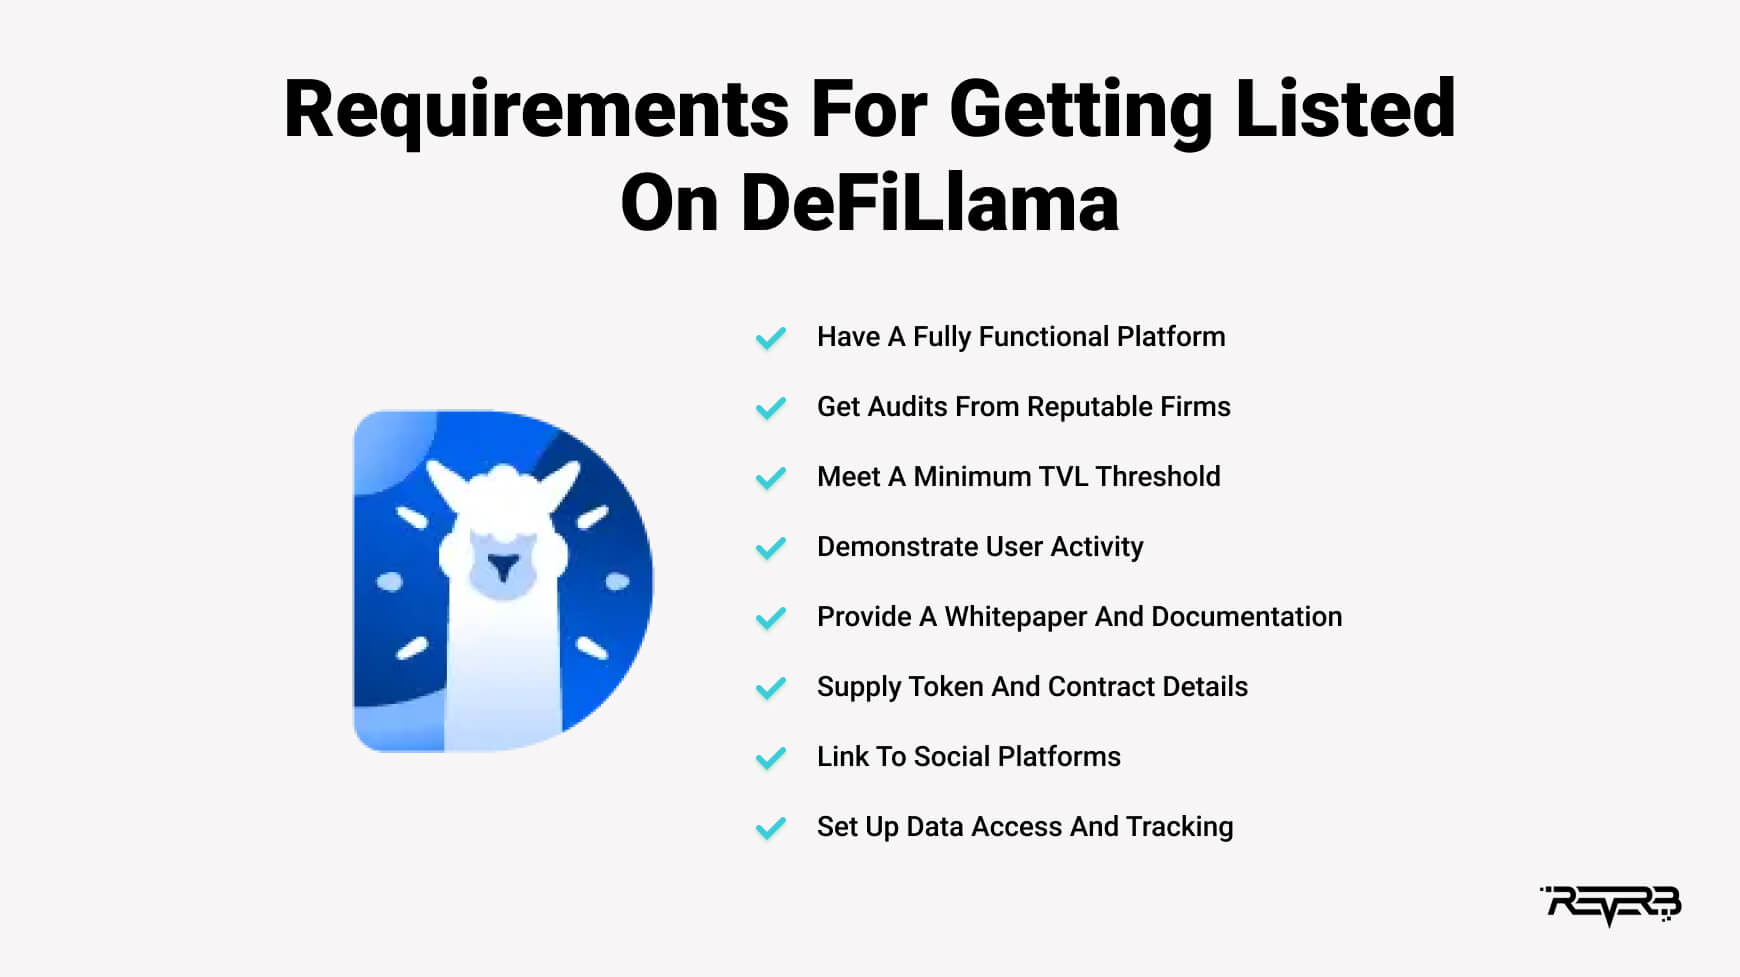 Requirements For Getting Listed On DeFiLlama